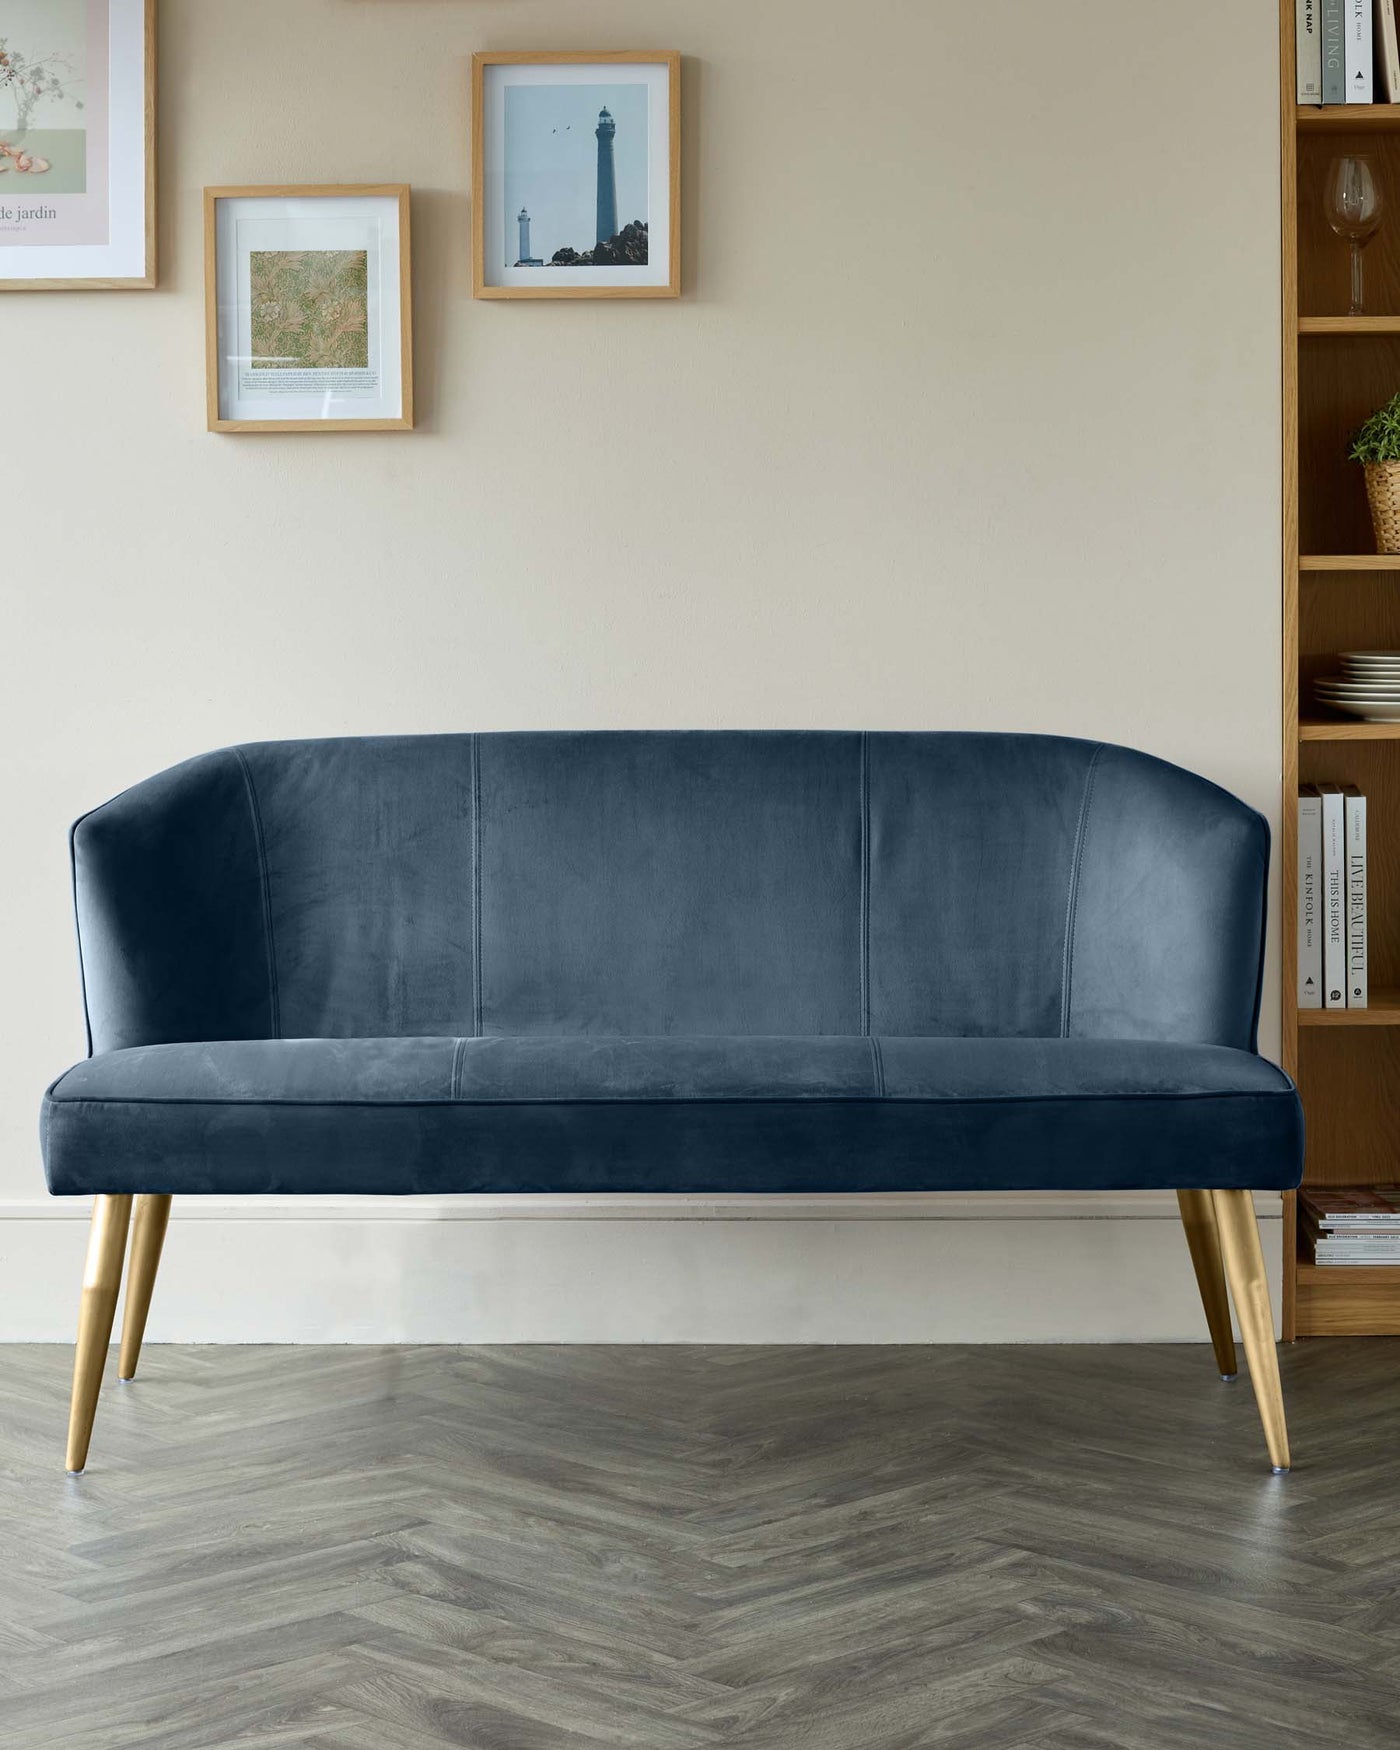 Elegant, mid-century inspired navy blue velvet sofa with a curved backrest, smooth seat, and angled gold metal legs, displayed in a contemporary living room setting.